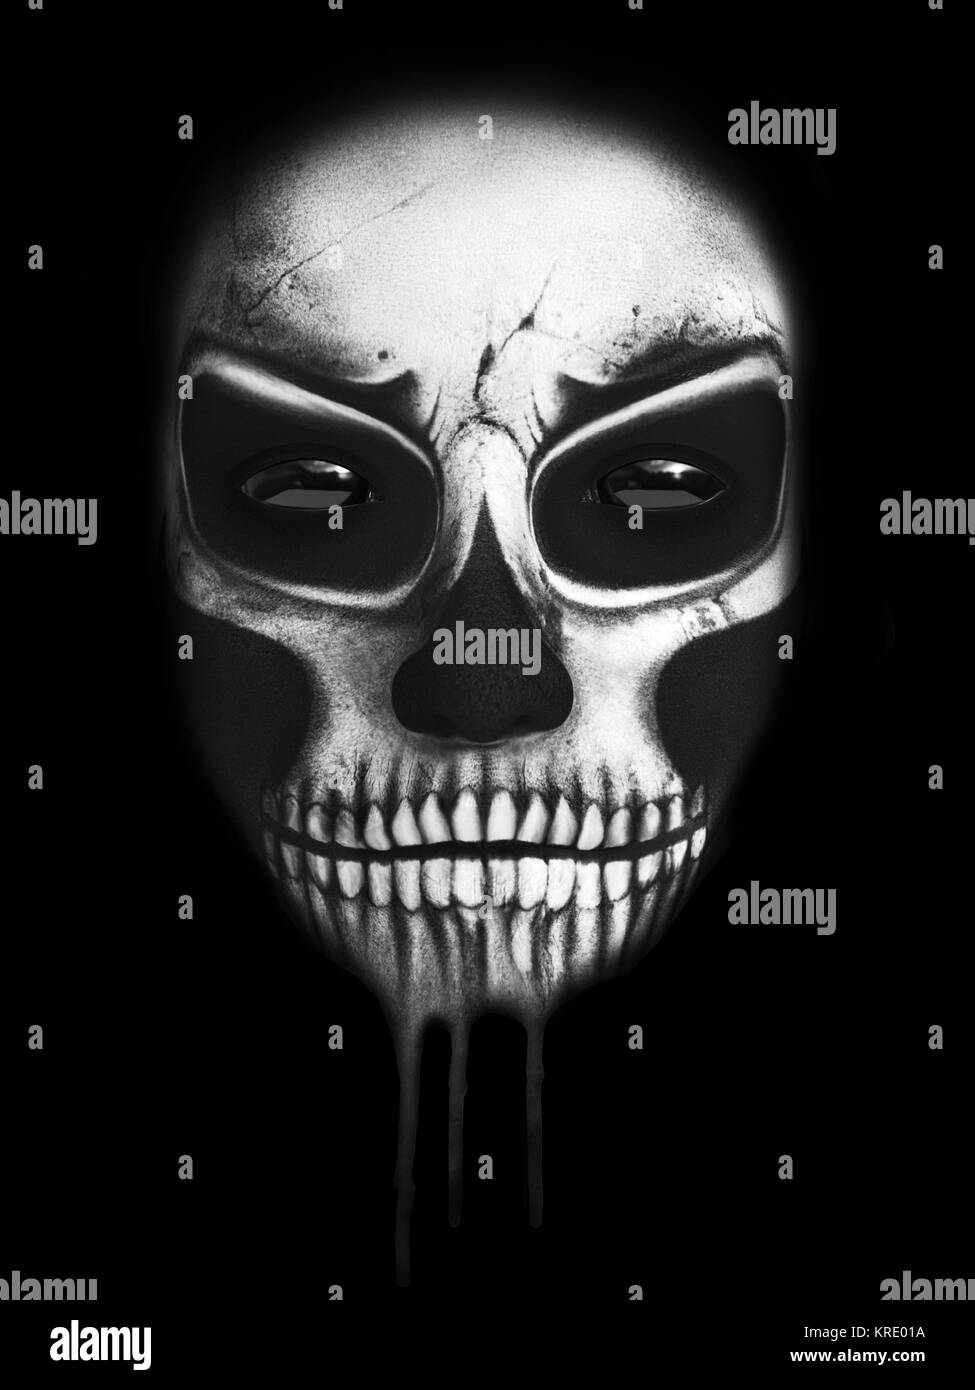 3D rendering of the face of the reaper. Stock Photo